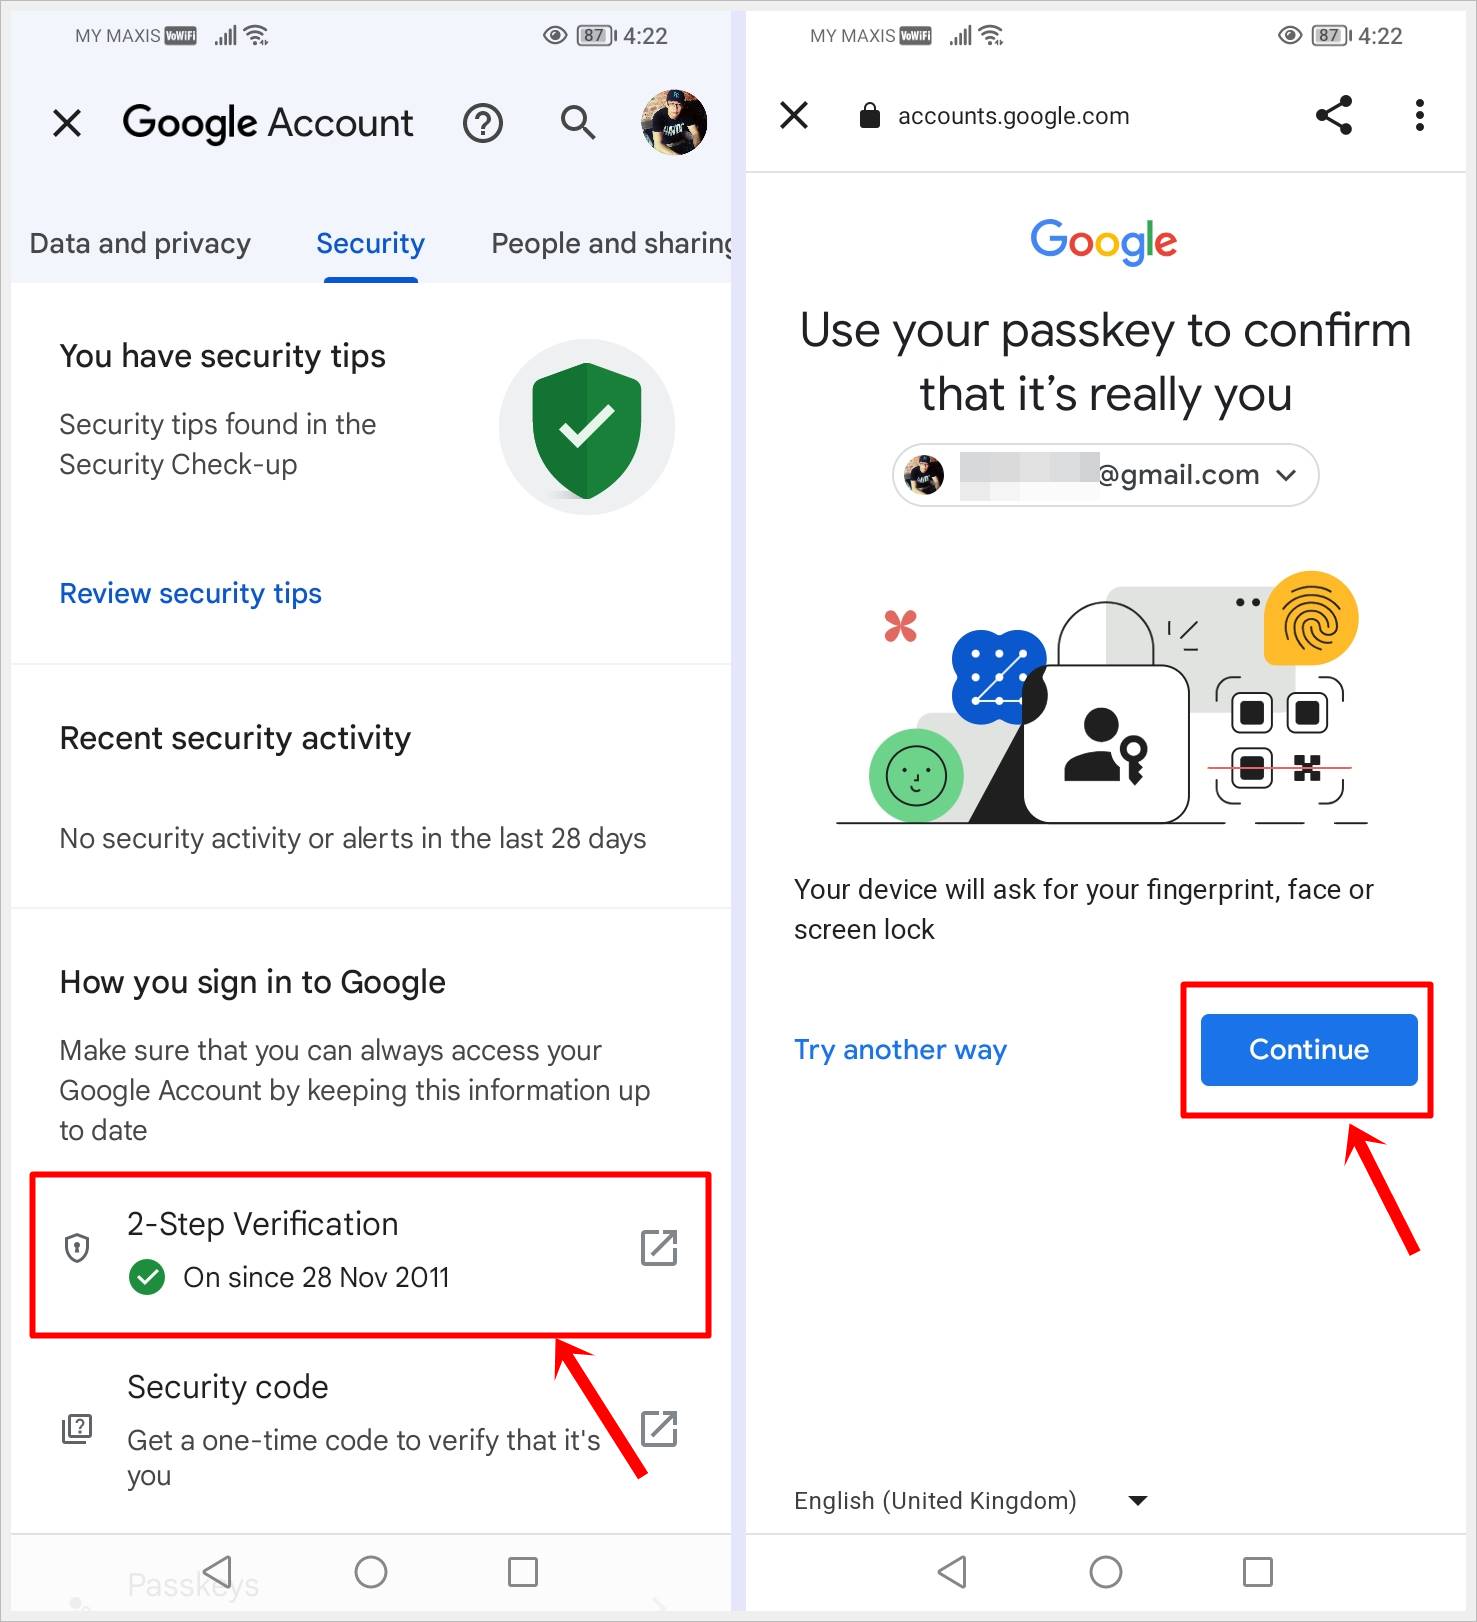 This image shows the Google Account page on mobile. The "2-Step Verification" option in the "How you sign in to Google" section is highlighted. It also shows the step to confirm user's identity via the user's passkey.